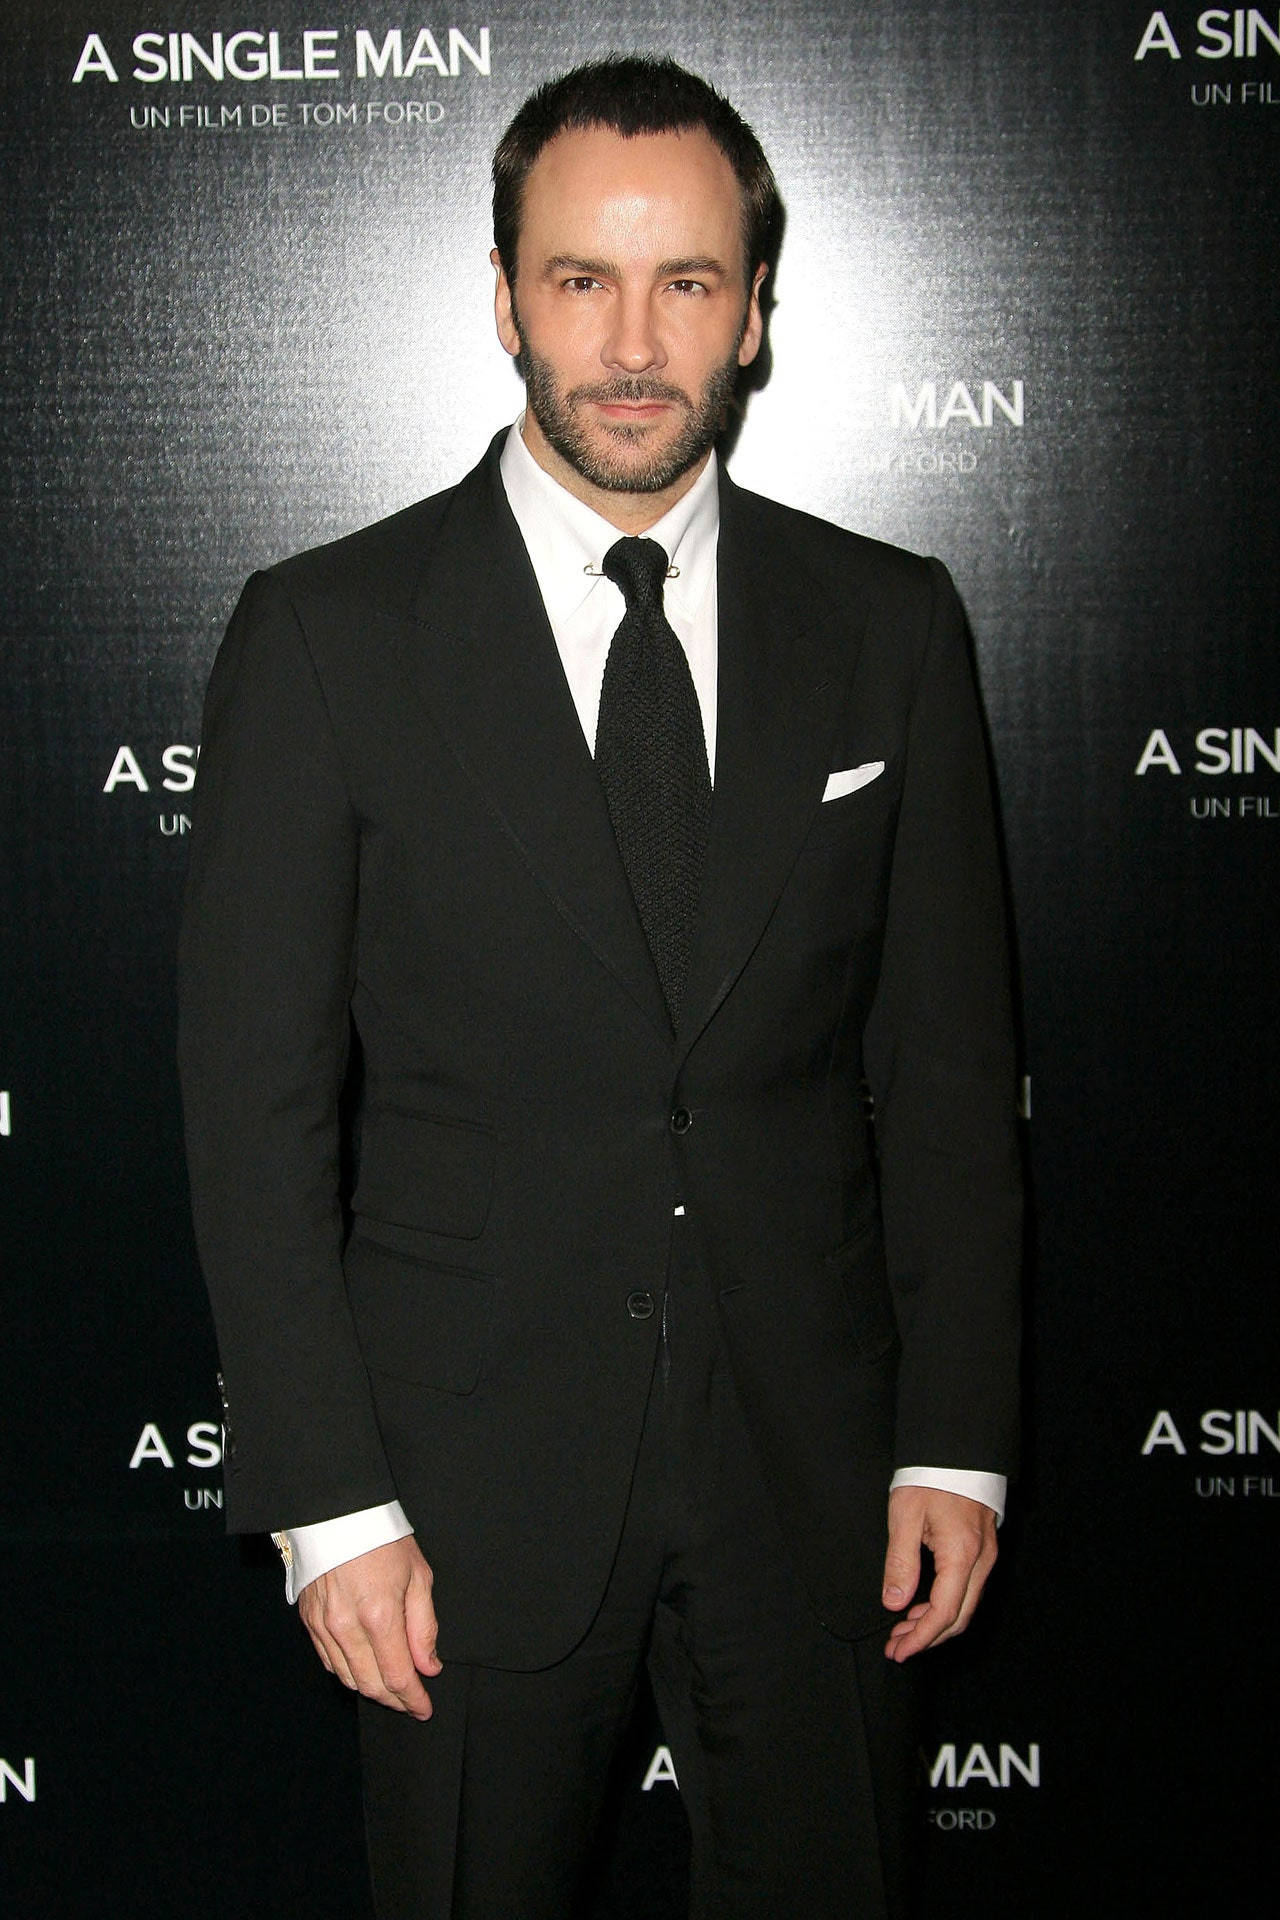 Tom Ford At Film Premiere Wallpaper